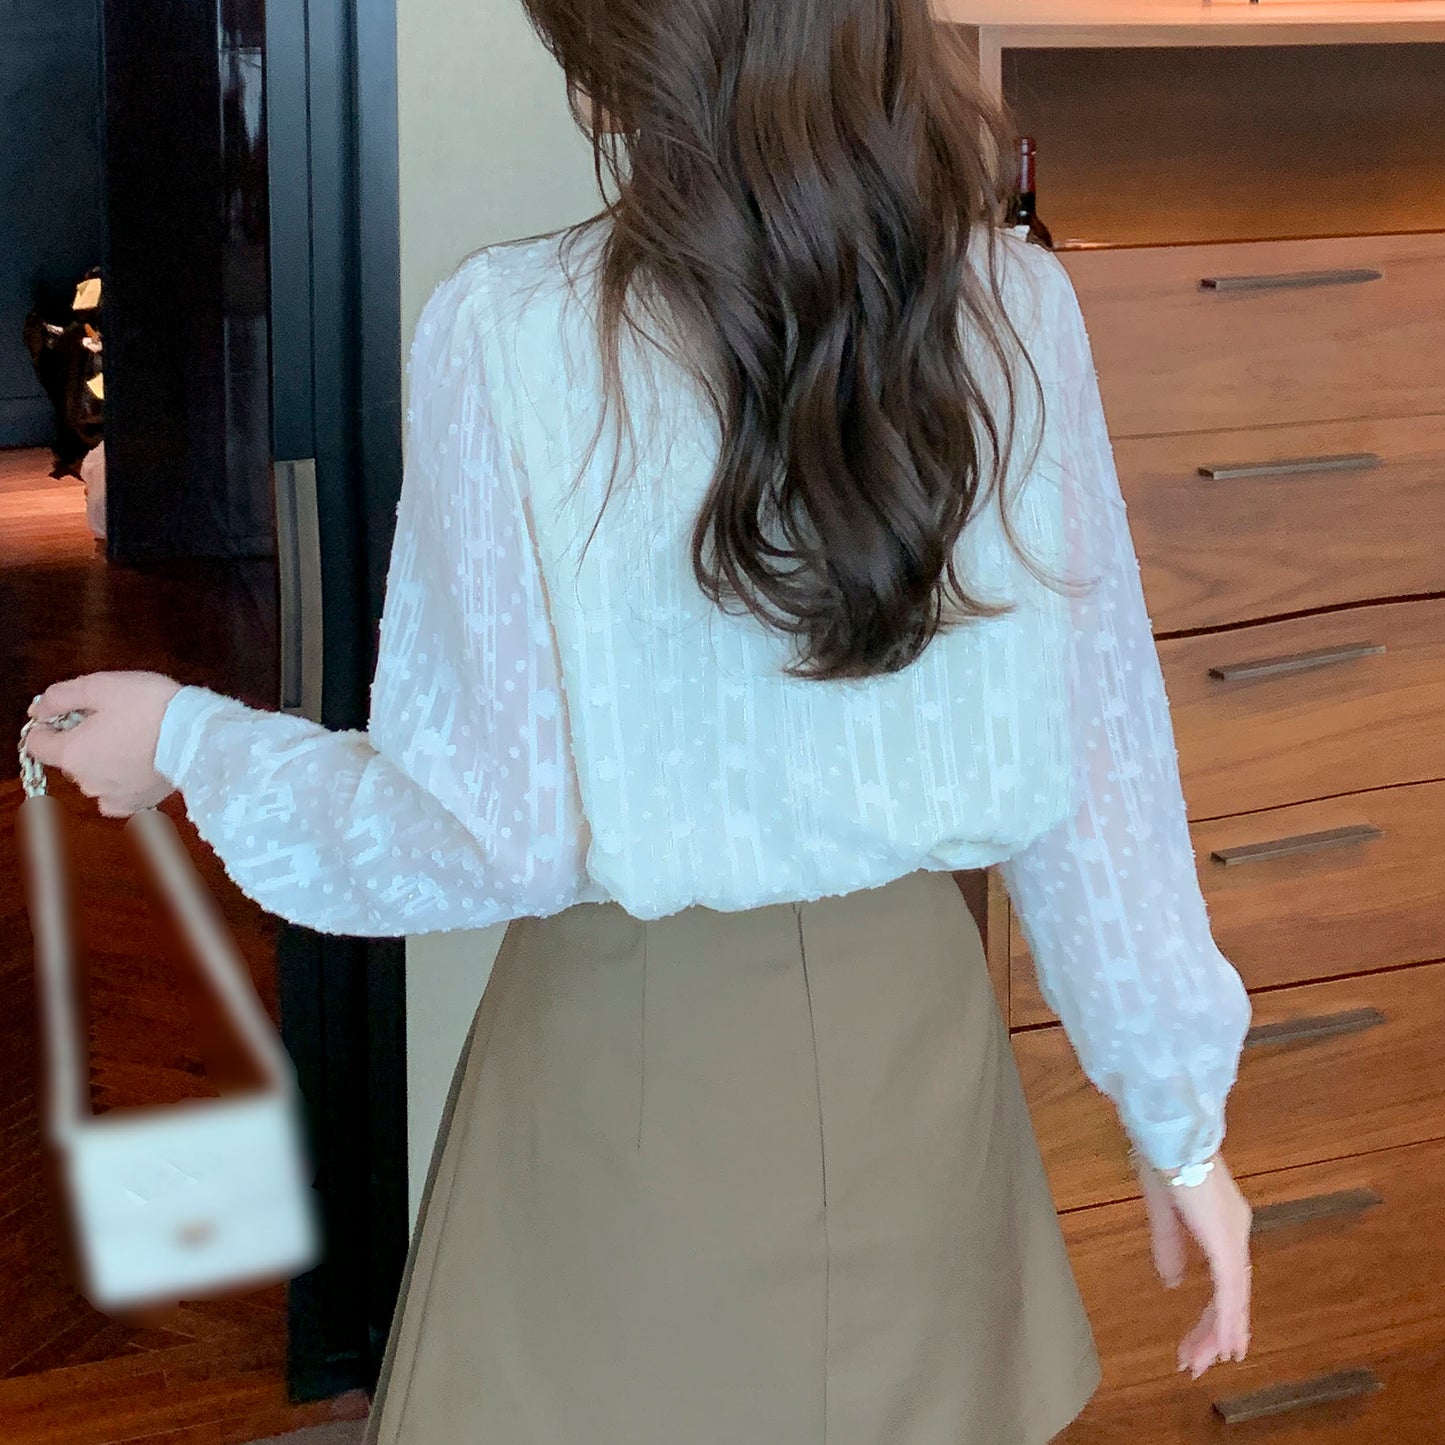 V-Neck Long Sleeve Button up Lace Solid Blouse